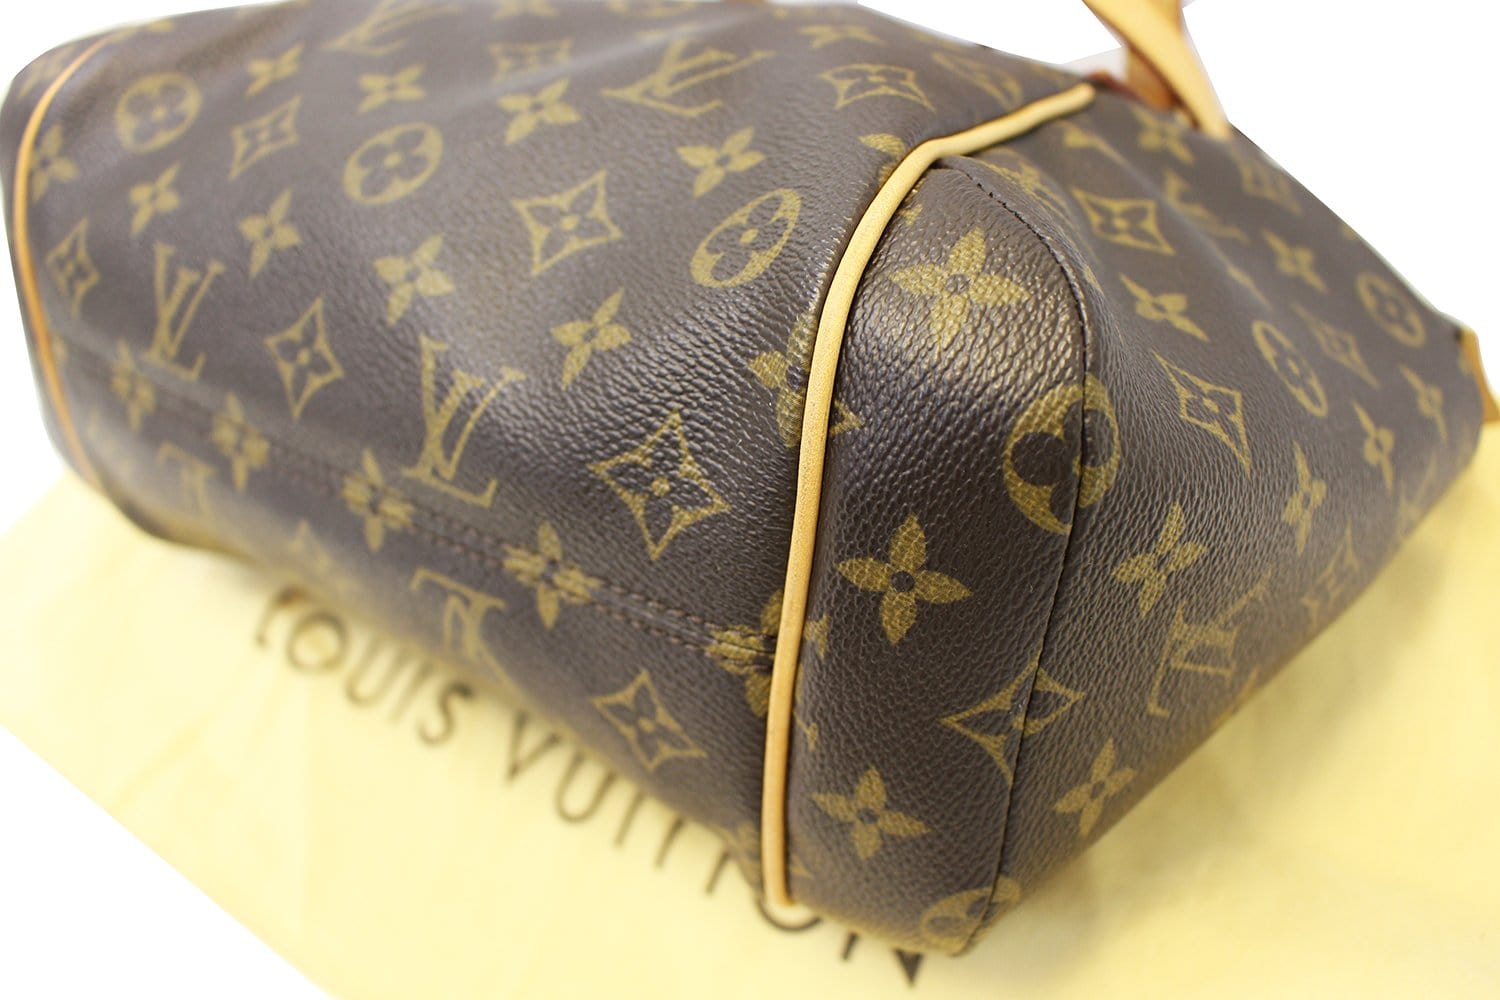 Louis Vuitton Totally Pm Tote Bag Authenticated By Lxr